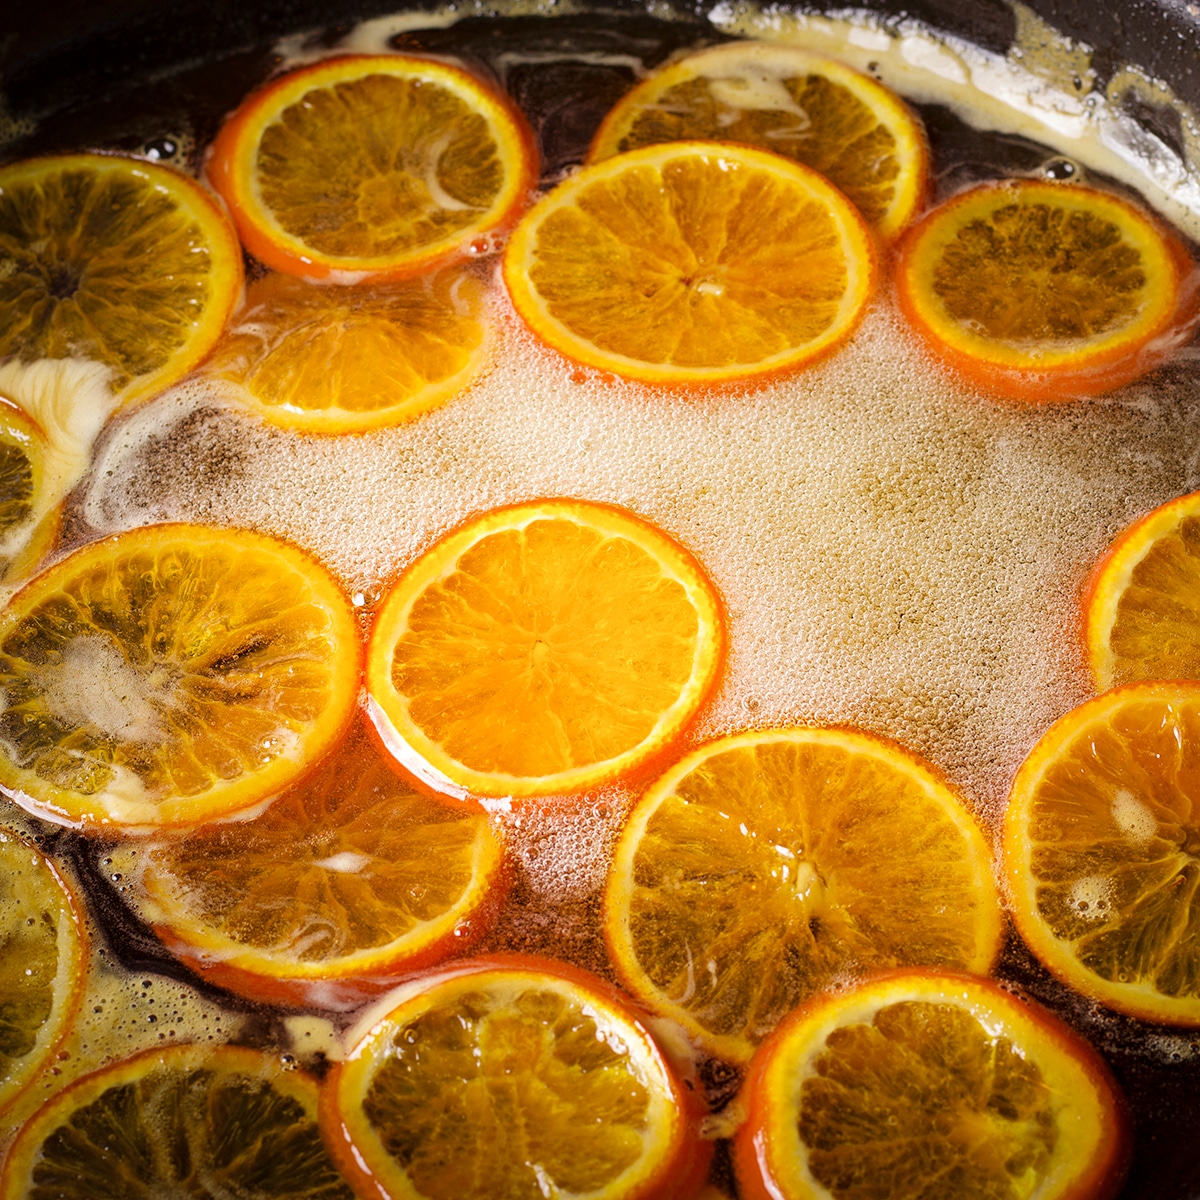 Orange slices simmering in simple syrup.